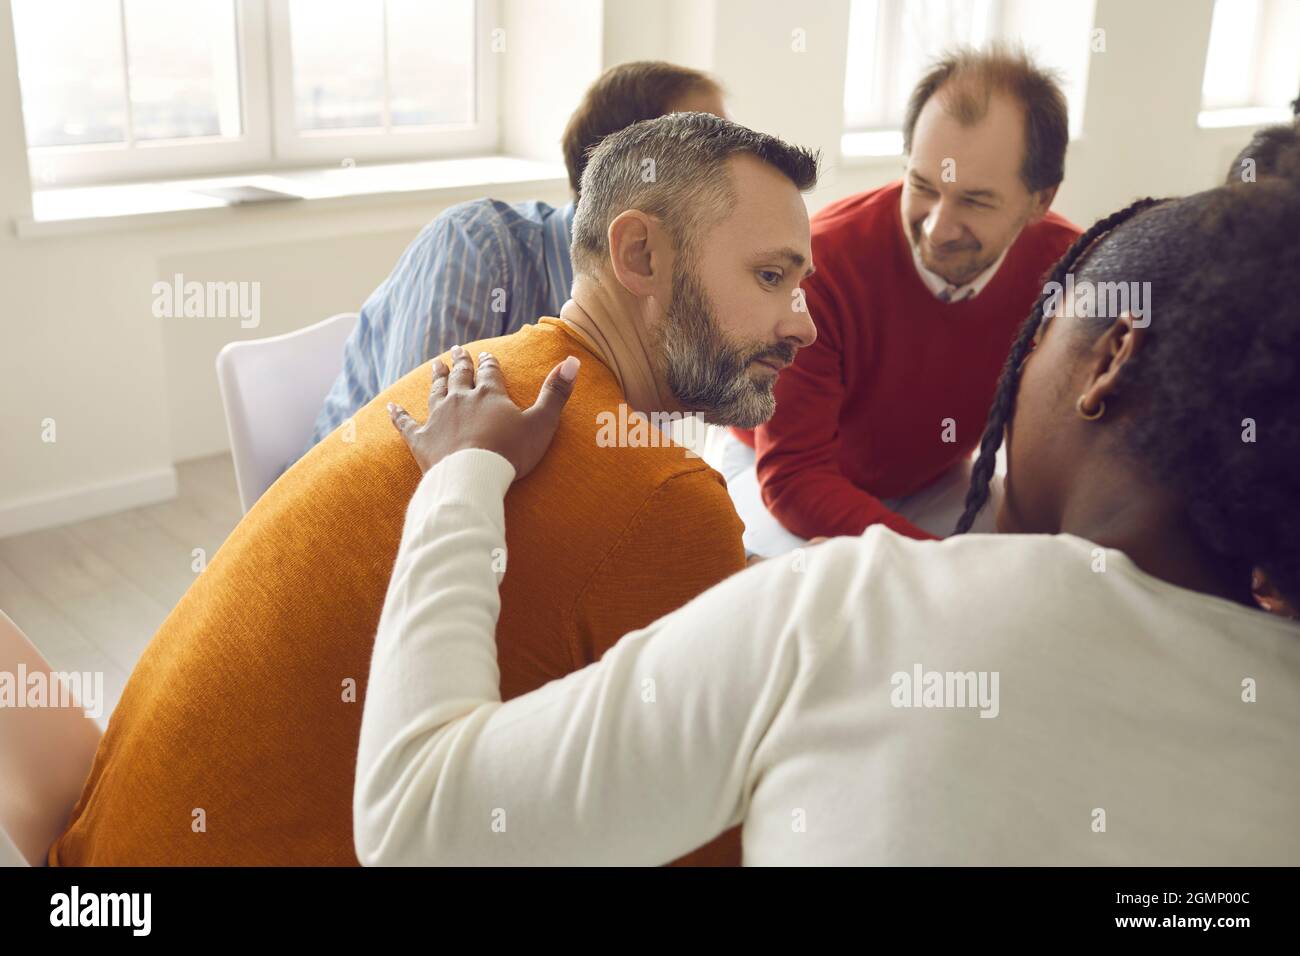 Diverse people communicating and supporting each other sitting in group therapy session Stock Photo